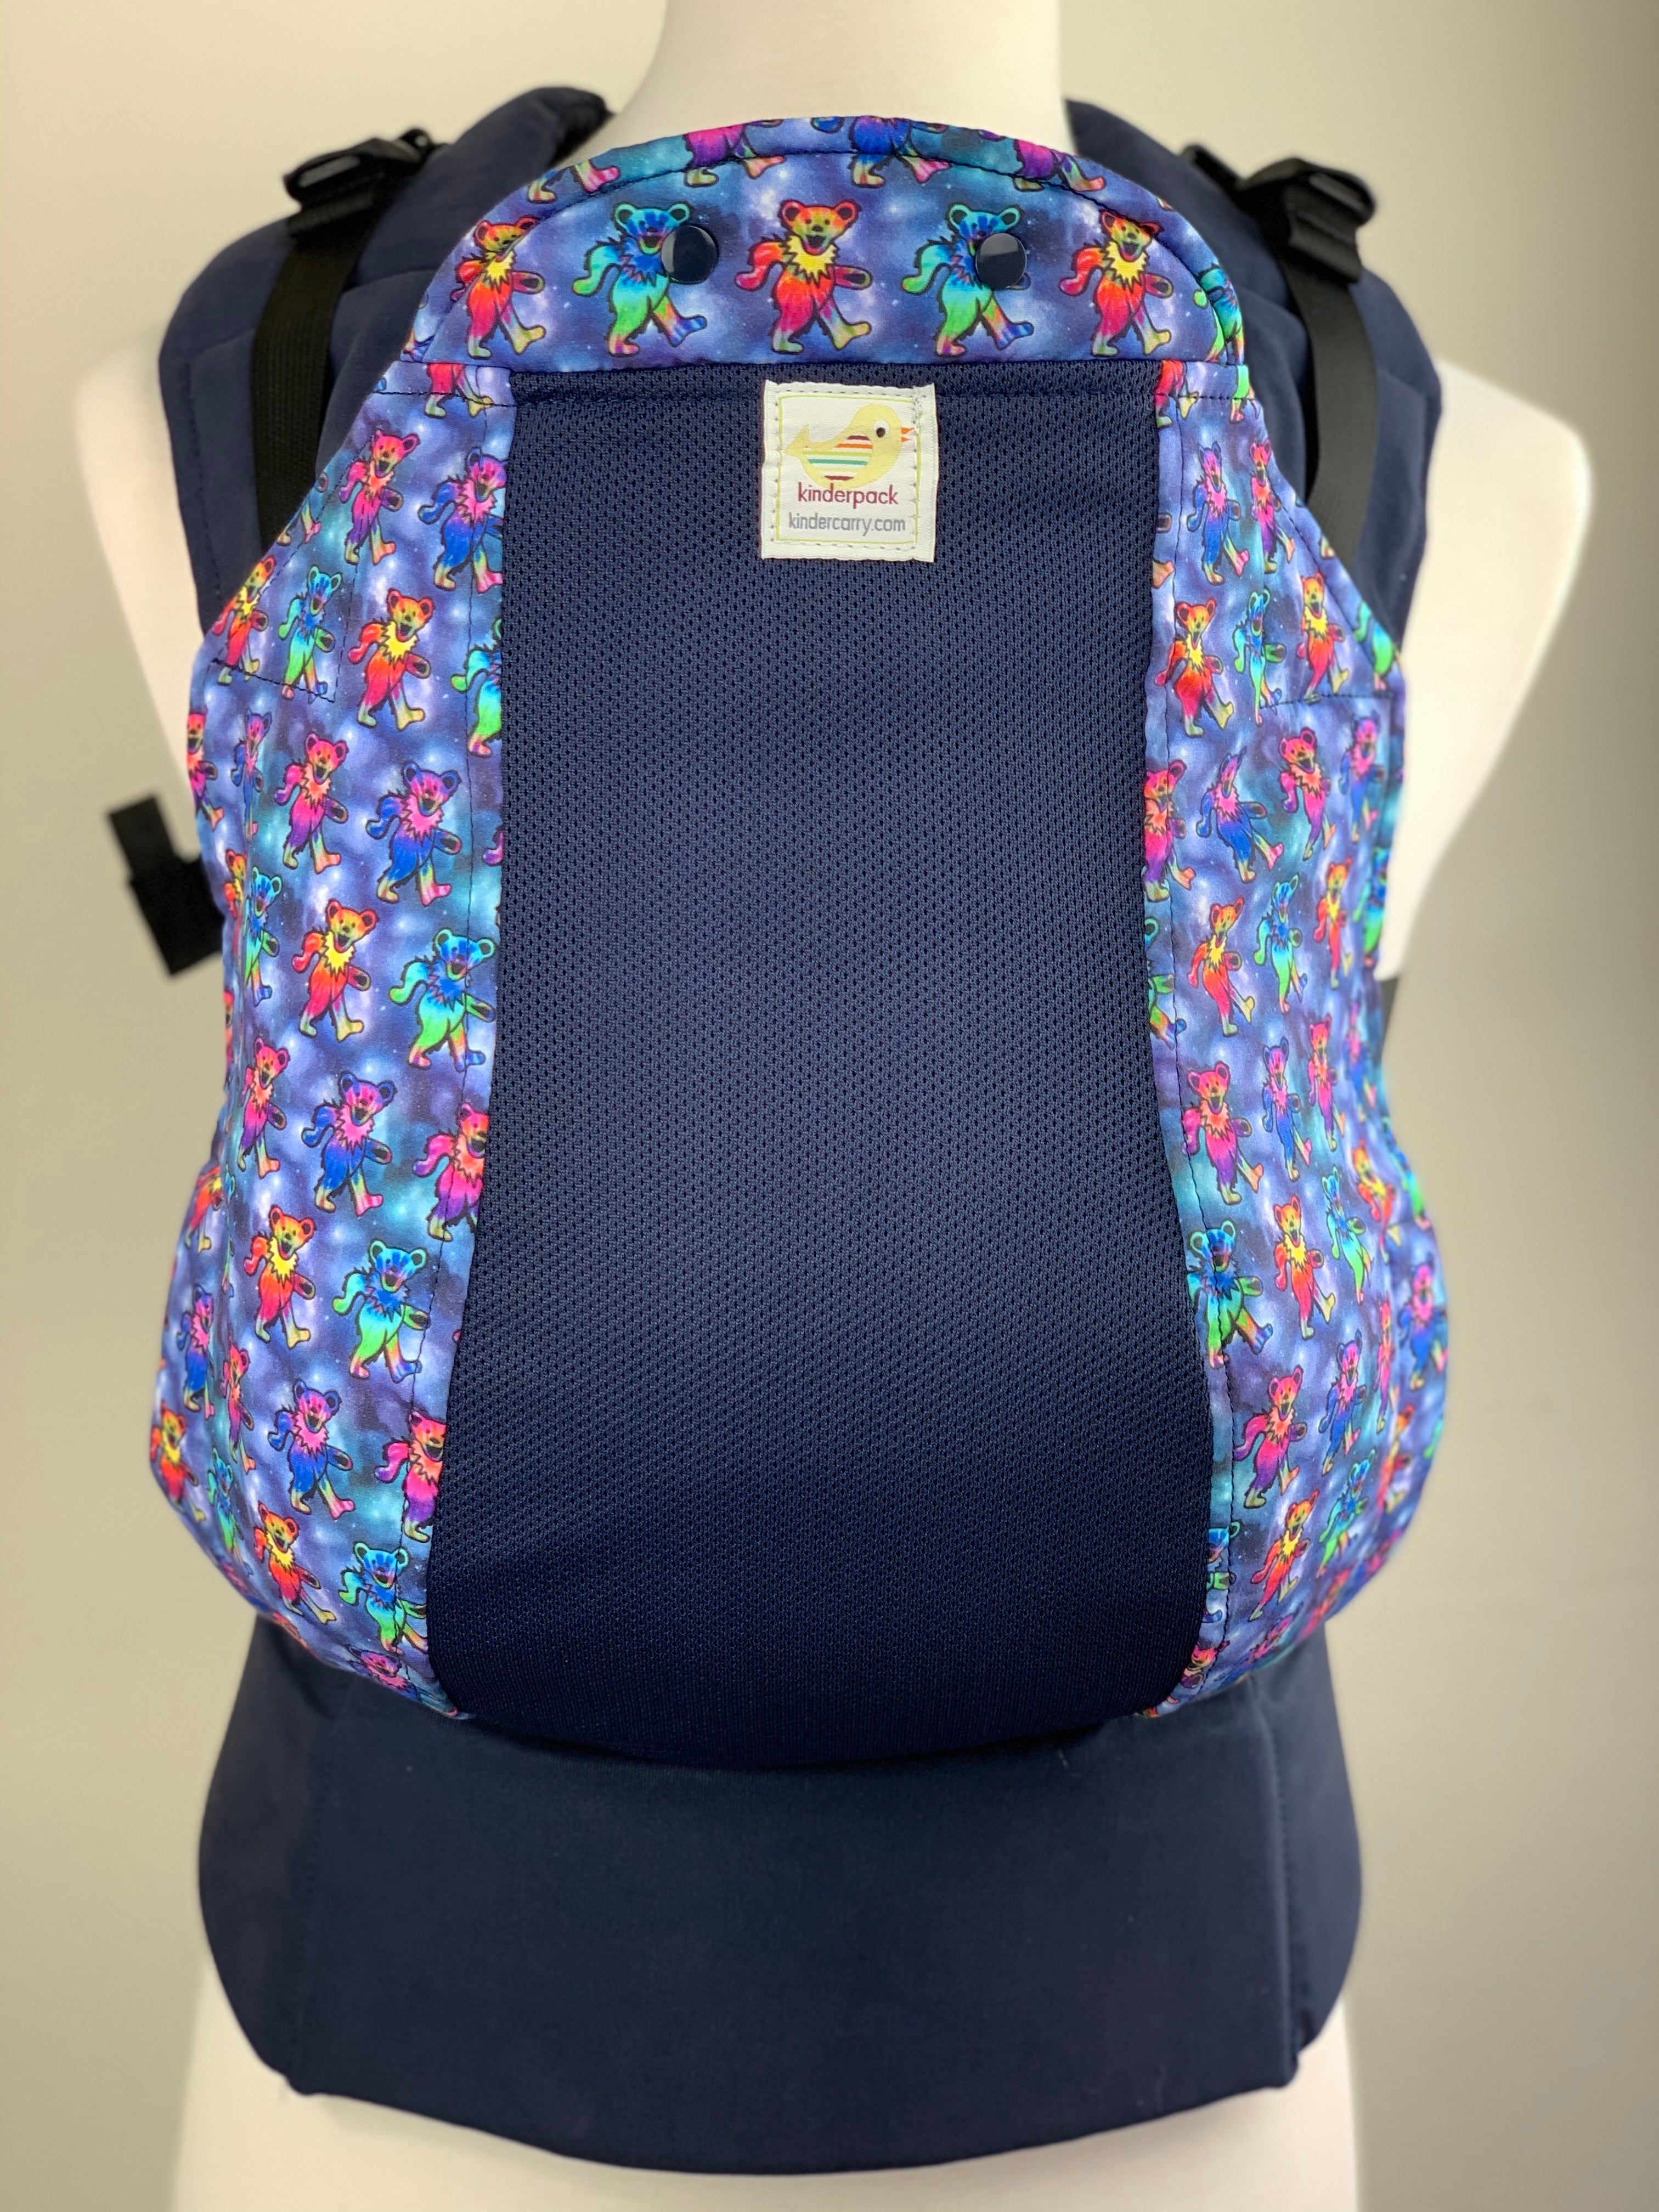 Shop Standard Kinderpack Baby Carriers – Kindercarry